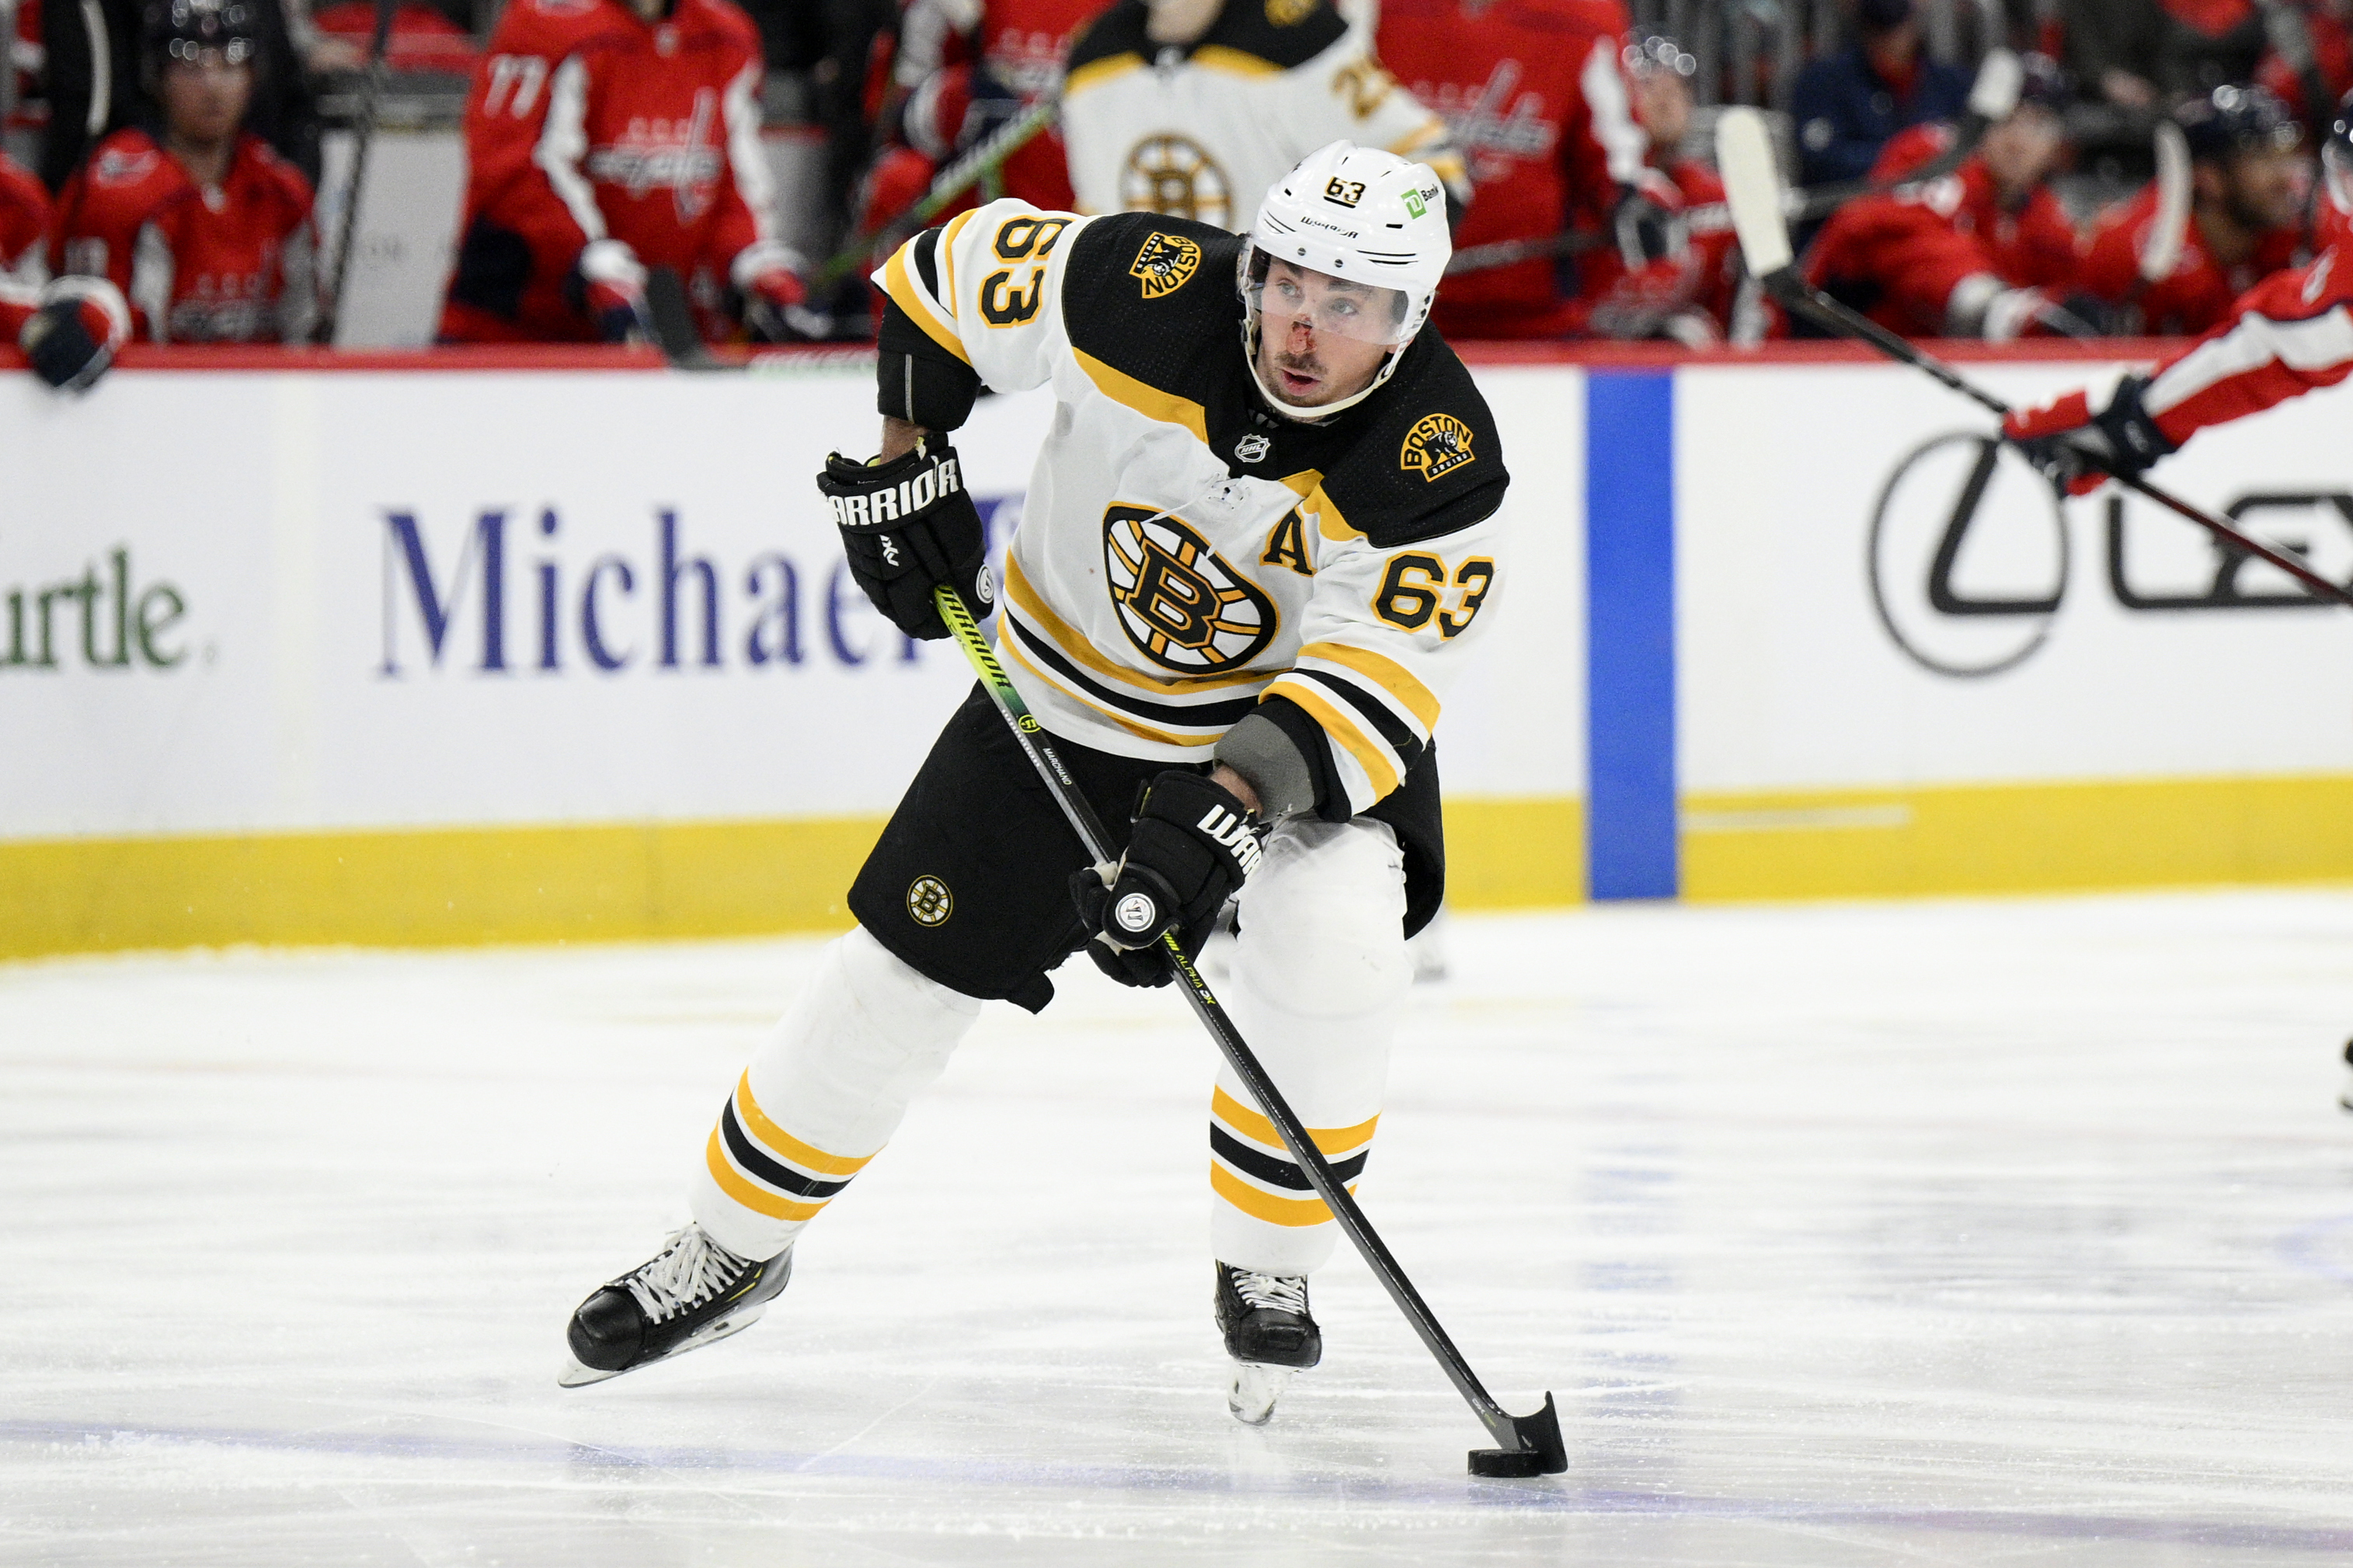 The Bruins were already red-hot. Then they got Brad Marchand back